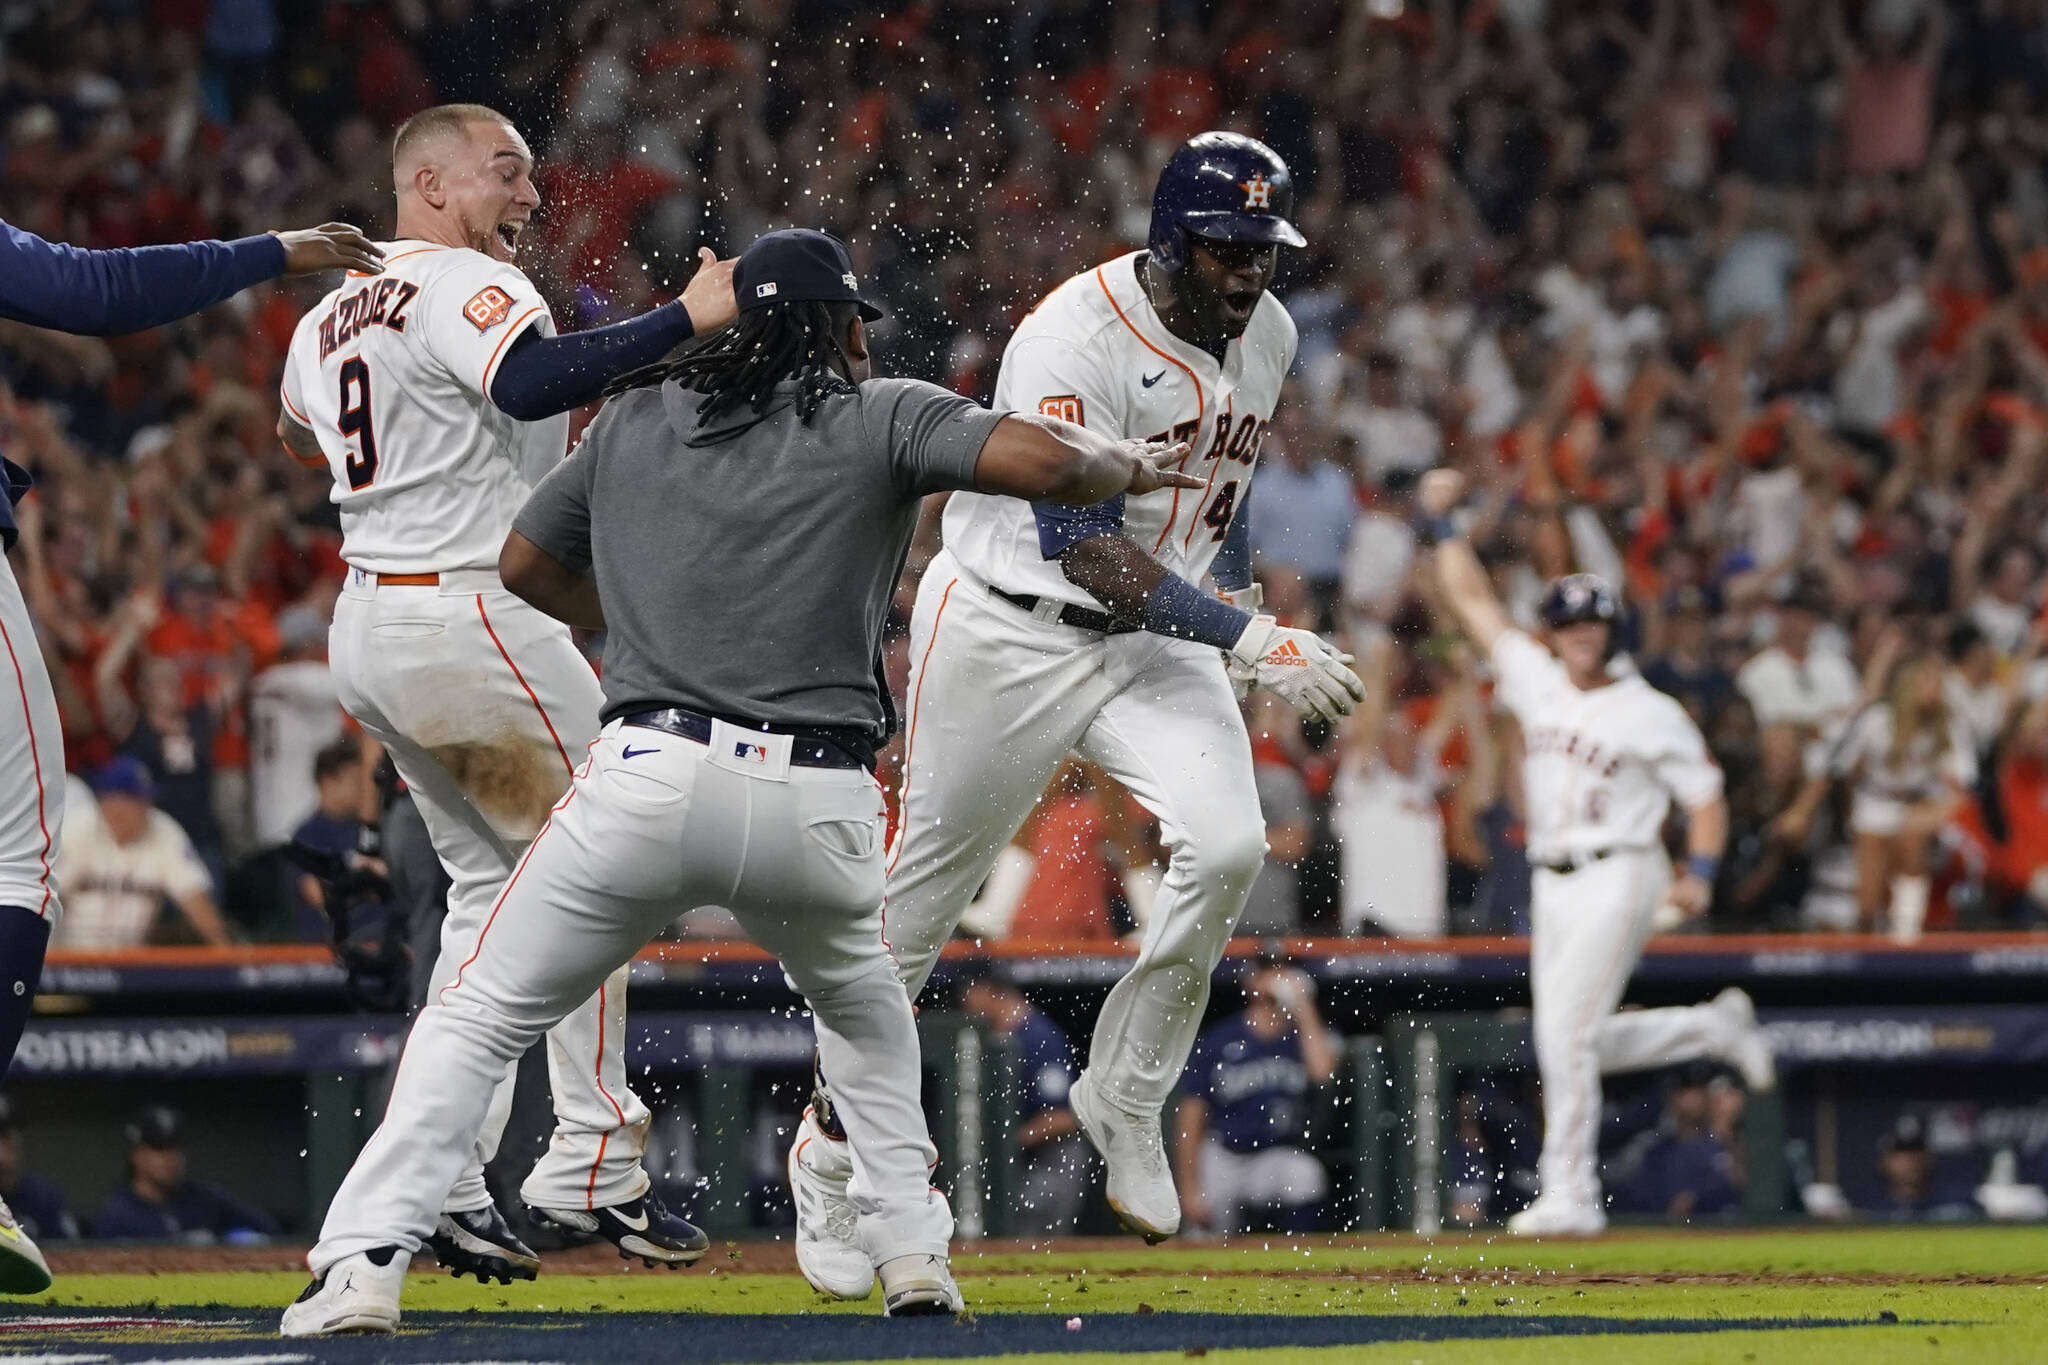 Astros designated hitter Yordan Alvarez (44) celebrates with teammates after his three-run, walk-off home run against the Mariners during the ninth inning of Game 1 of an American League Division Series game on Tuesday in Houston. (AP Photo/David J. Phillip)